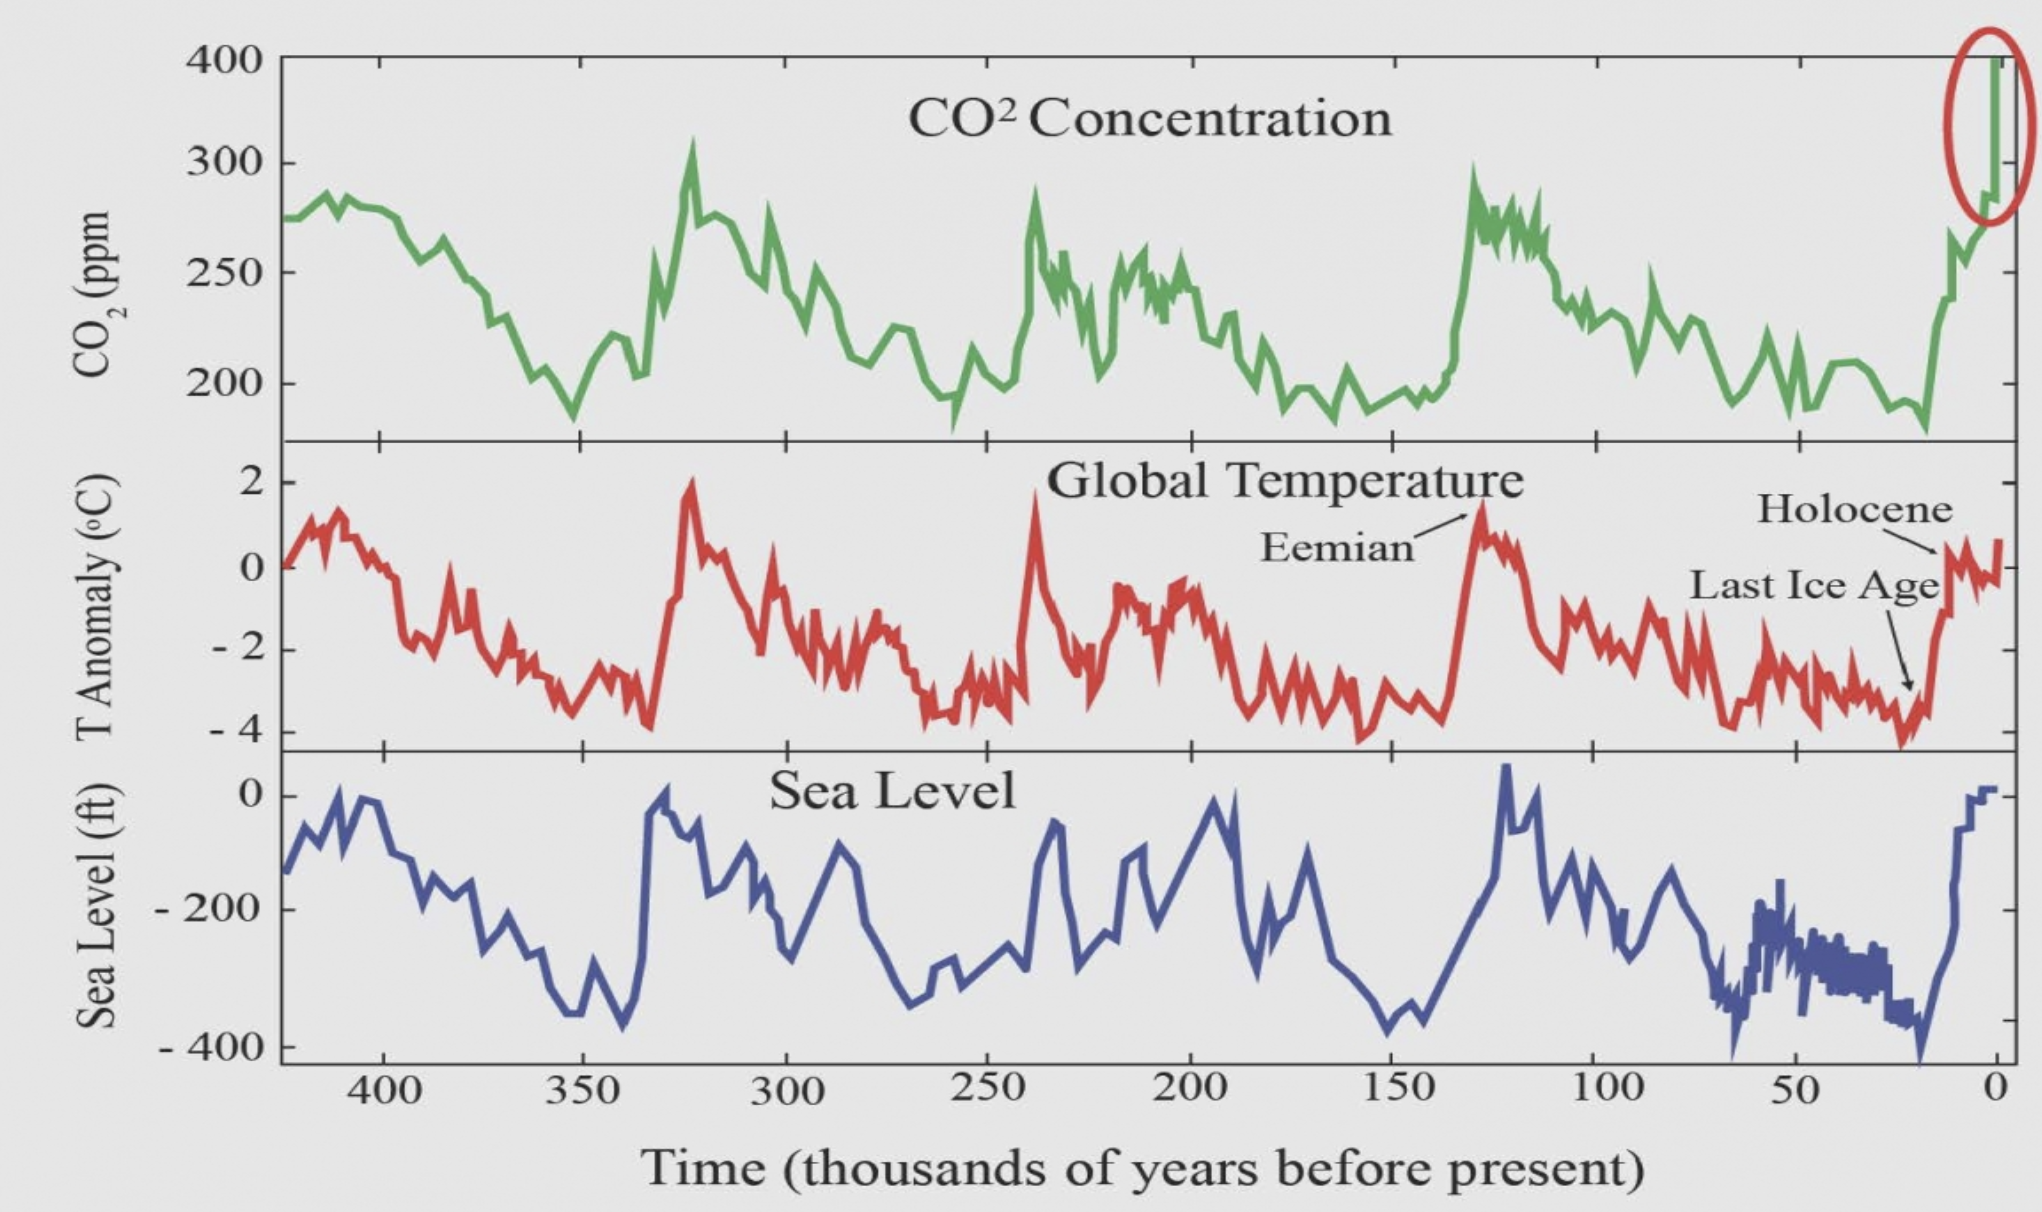 <ul><li><p><span>CO<sub>2 </sub>&nbsp;levels rise, so do temperature and sea levels</span></p></li><li><p><span>&nbsp;CO<sub>2&nbsp; </sub>levels have risen far faster in the last 200+ years that at any other point in Earth’s geological history</span></p></li><li><p><span>At the time of the industrial revolution,CO2 concentration was ~288 ppm. This means that since the Industrial Revolution, CO 2 levels have risen by ~48%.</span></p></li></ul>